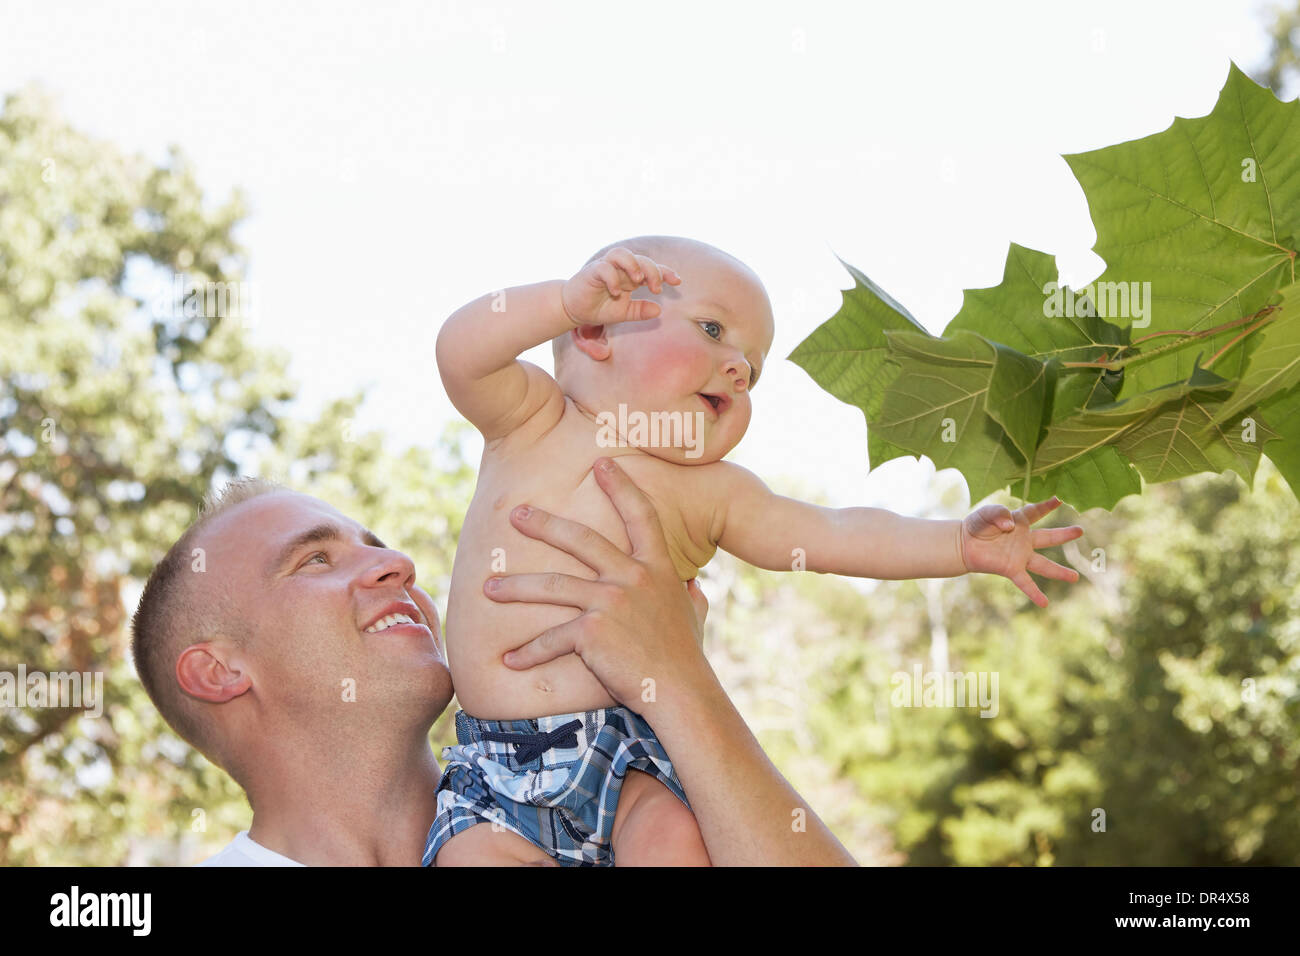 Father holding baby outdoors Stock Photo